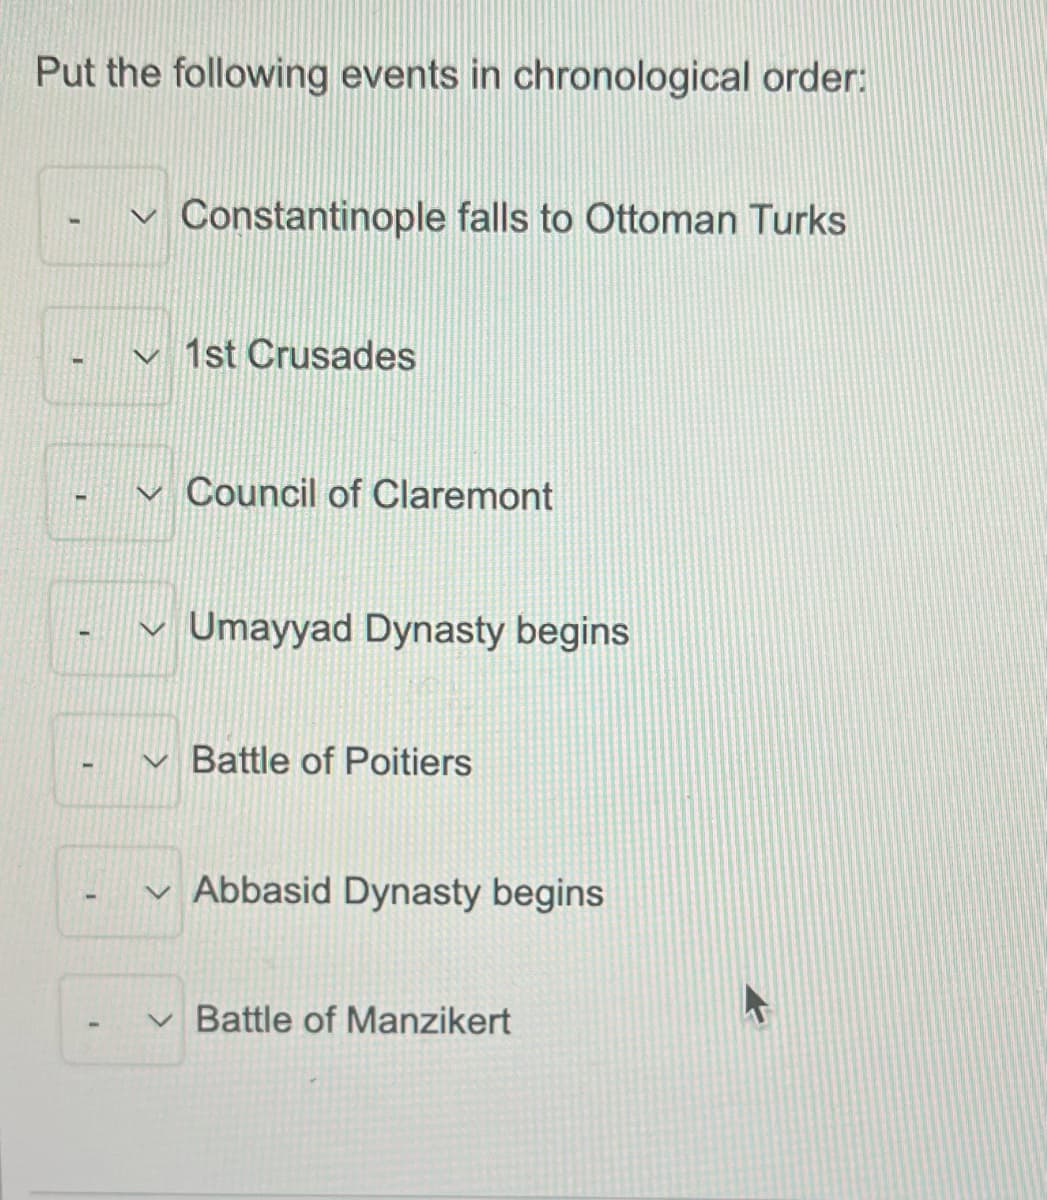 Put the following events in chronological order:
Constantinople falls to Ottoman Turks
v 1st Crusades
Council of Claremont
Umayyad Dynasty begins
Battle of Poitiers
v Abbasid Dynasty begins
v Battle of Manzikert
